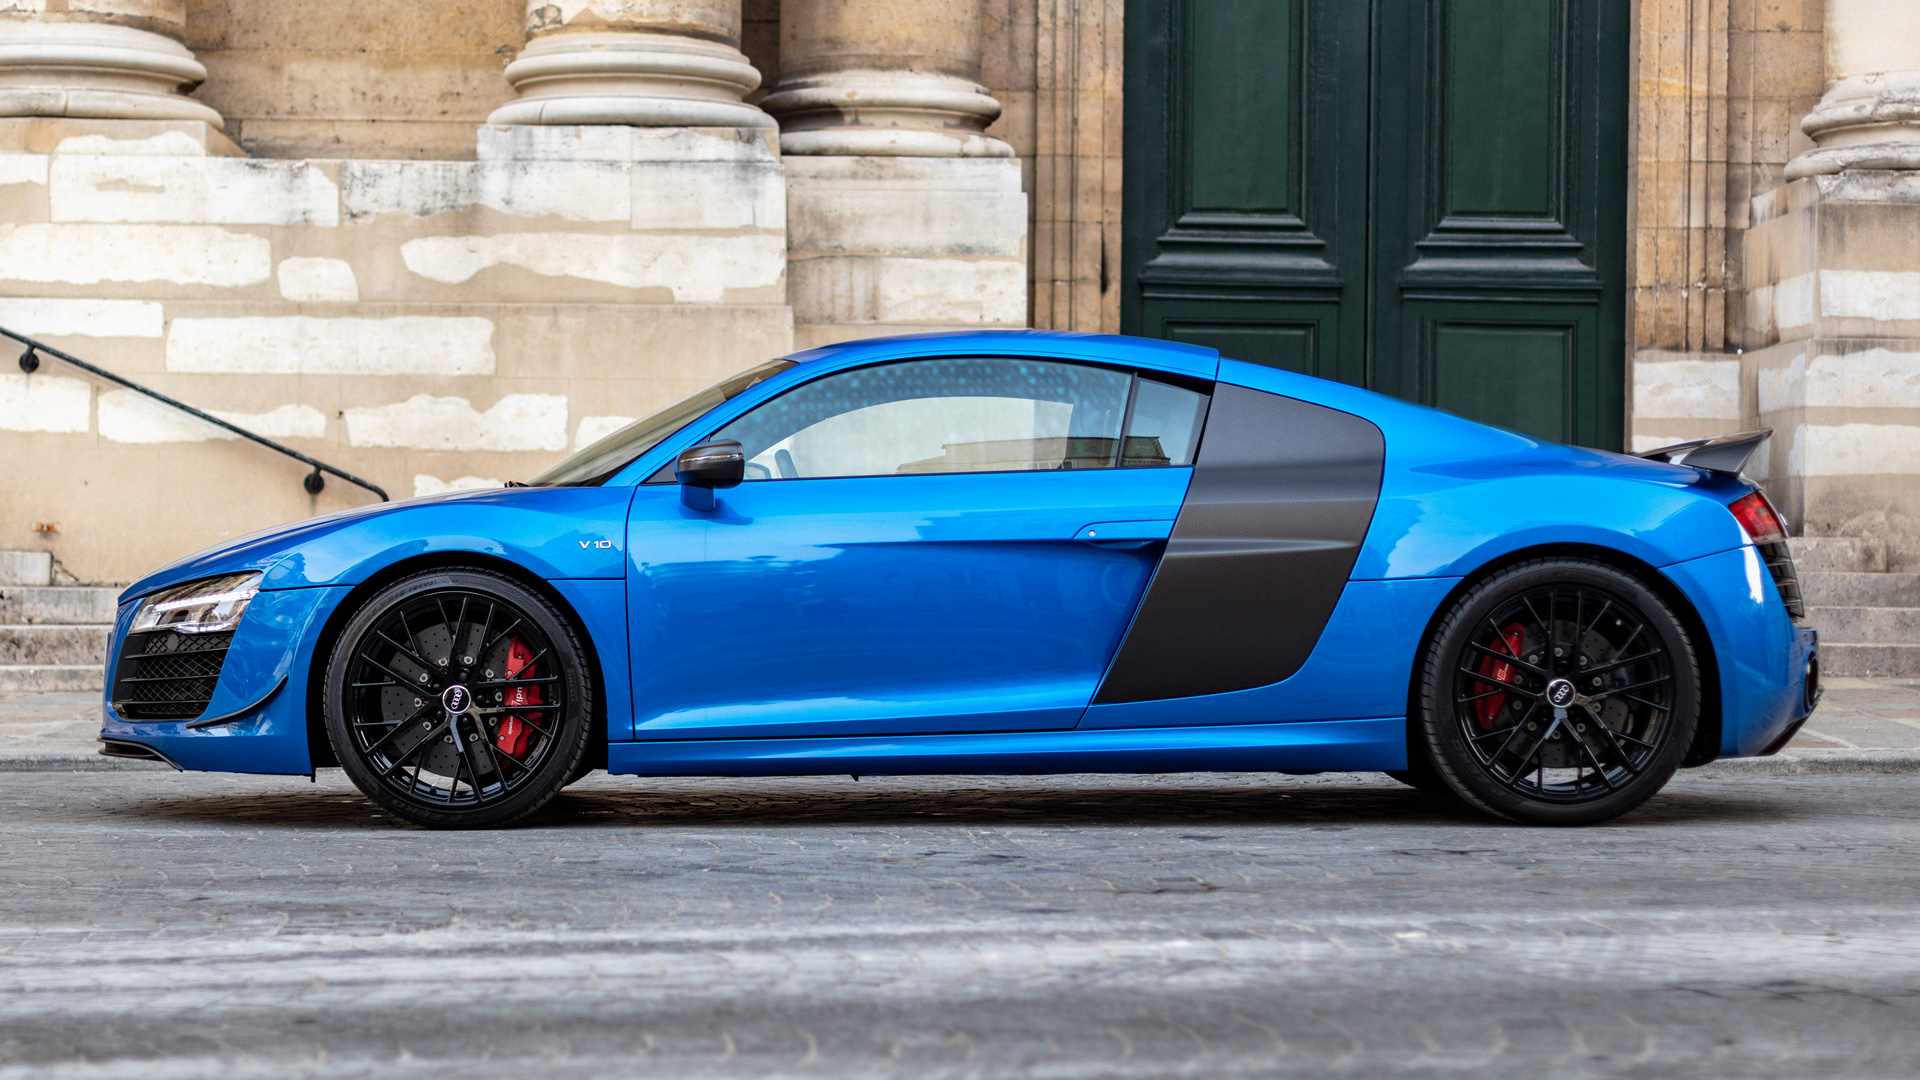 2014 Audi R8 V10 Lmx Coupe Hd Wallpaper Background Image 1920x1080